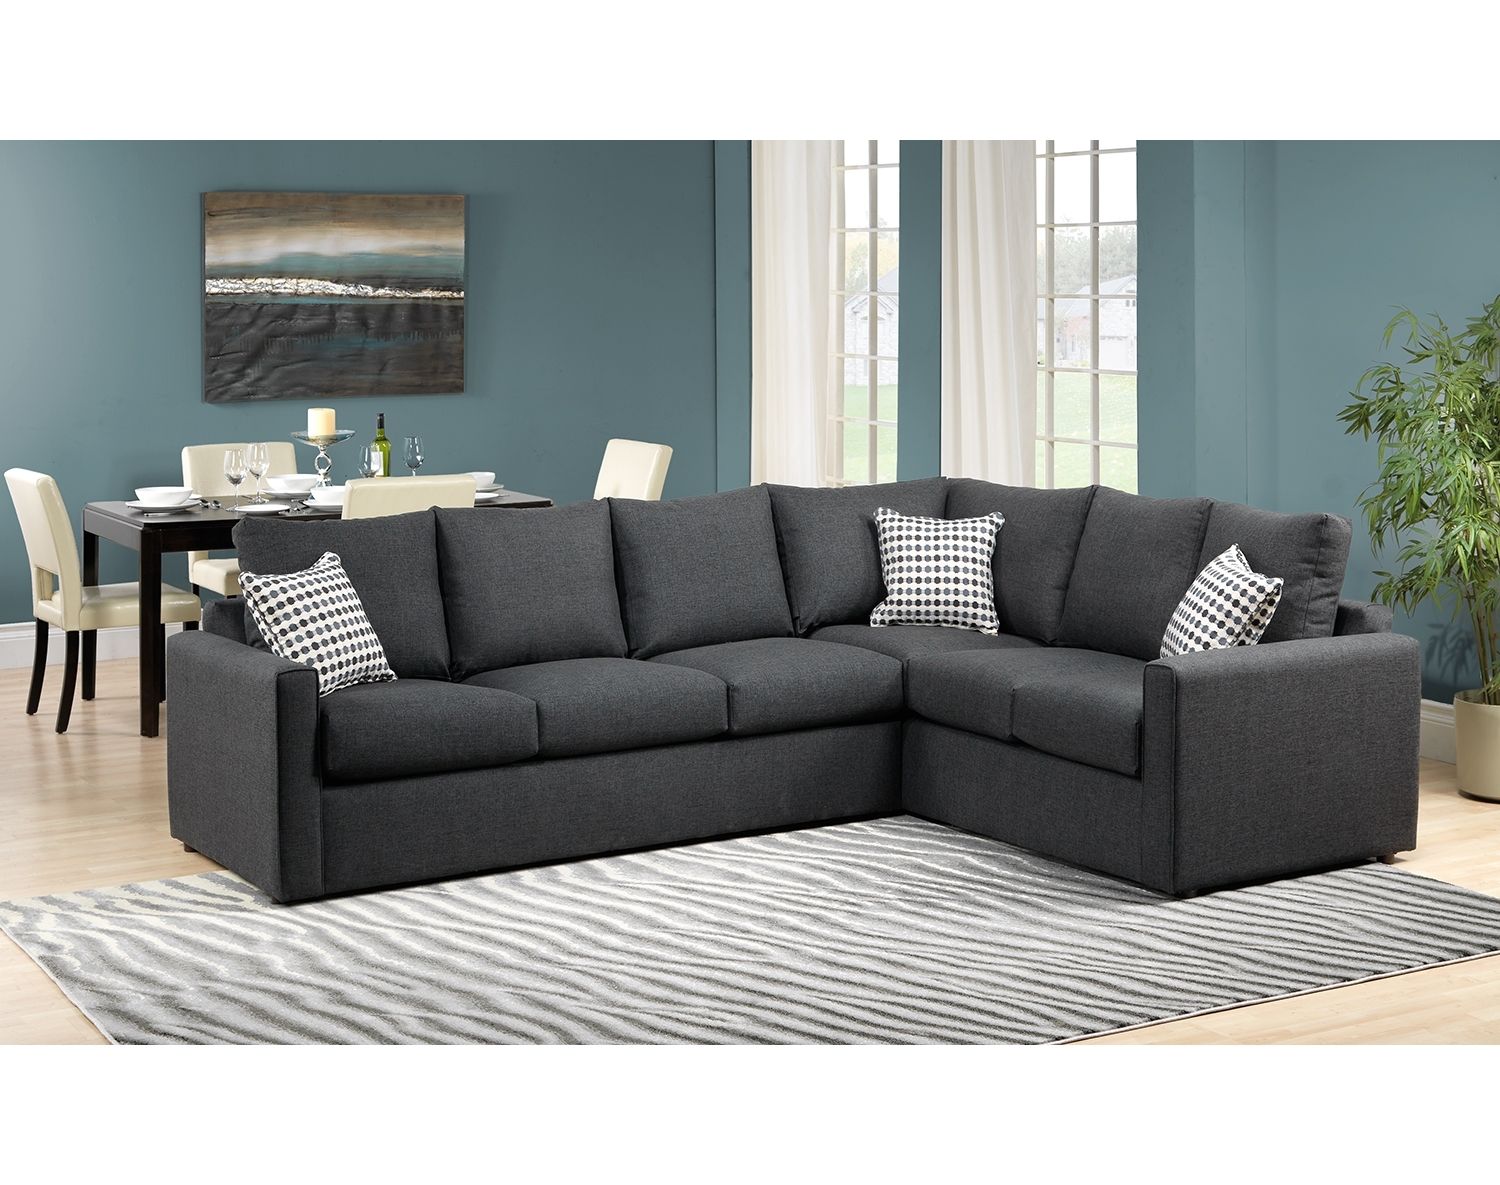 Best Cheap Sofa Bed Sectionals 21 On Diana Dark Brown Leather Inside Diana Dark Brown Leather Sectional Sofa Set (View 9 of 12)